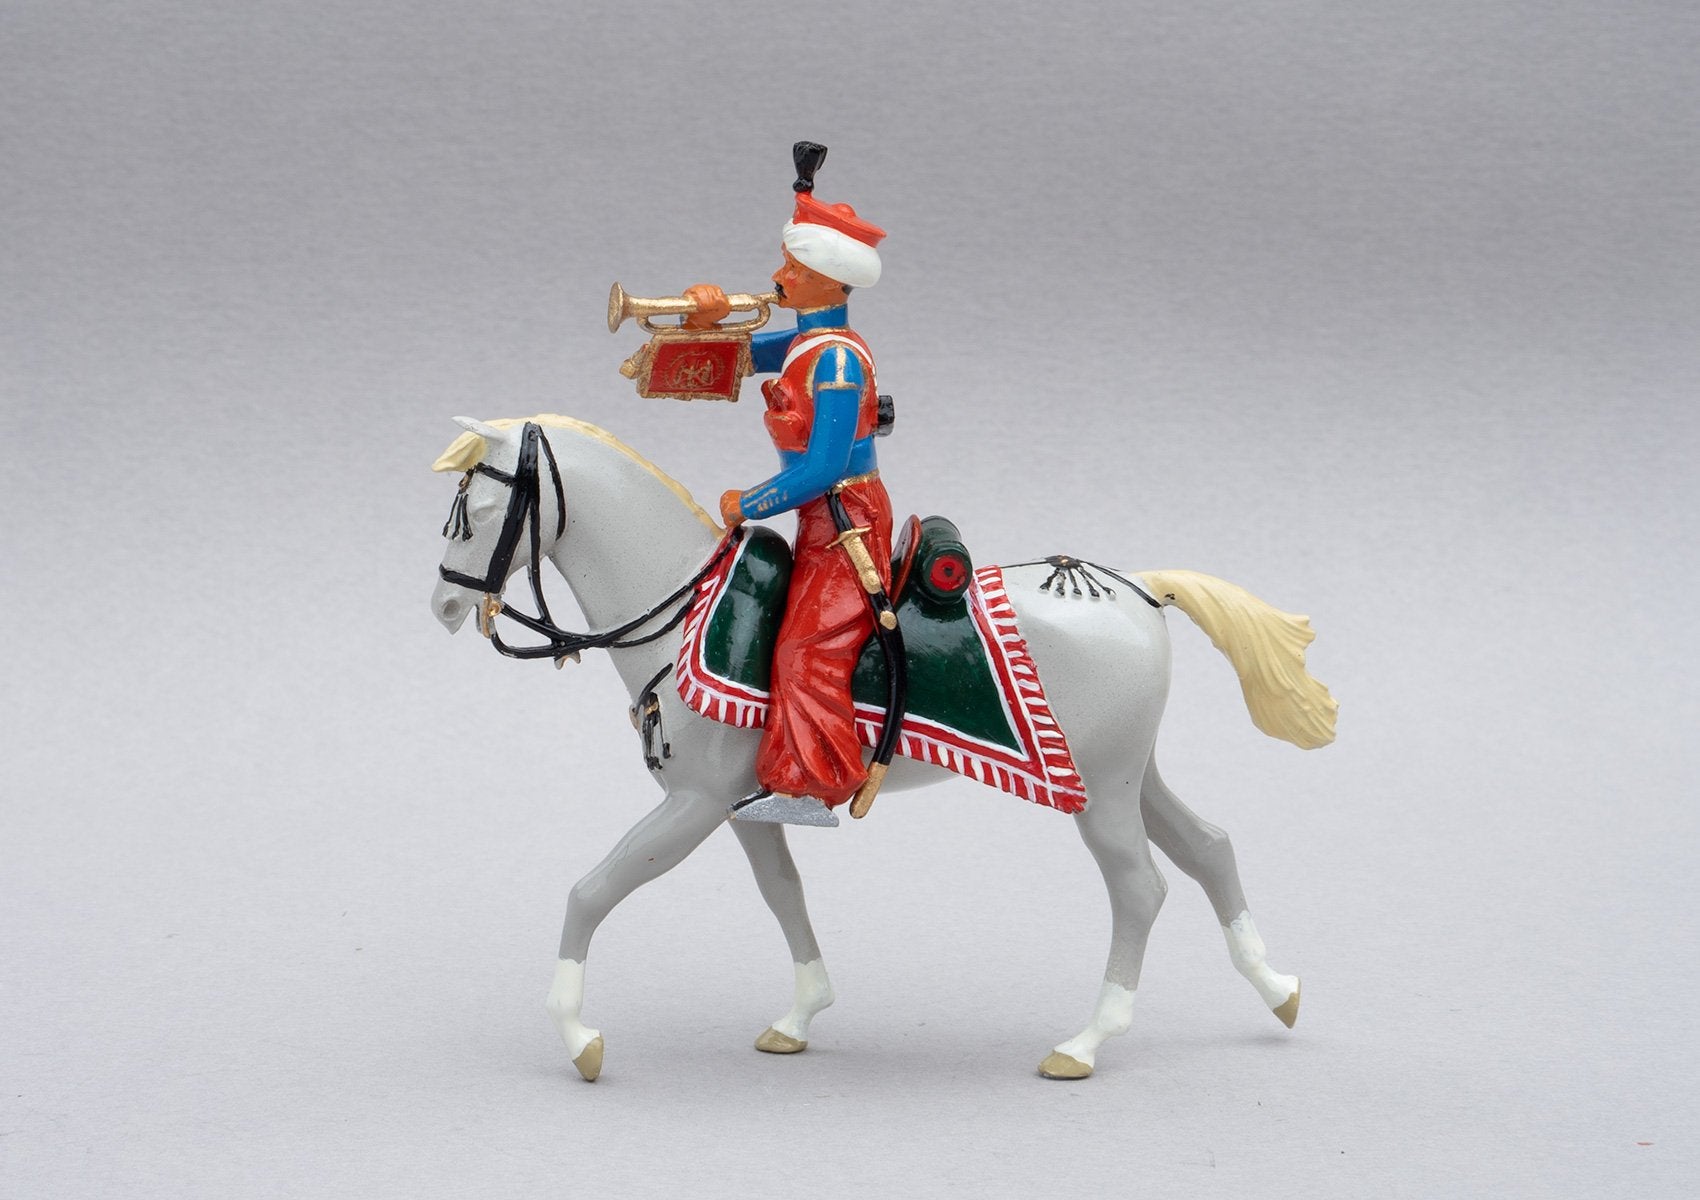 Set 119 Mameluke Trumpeter | French Cavalry | Napoleonic Wars | Trumpeter of Marmeluke cavalry. Distinguished by his sky blue tunic. Single mounted trumpeter on grey horse | Waterloo | © Imperial Productions | Sculpt by David Cowe